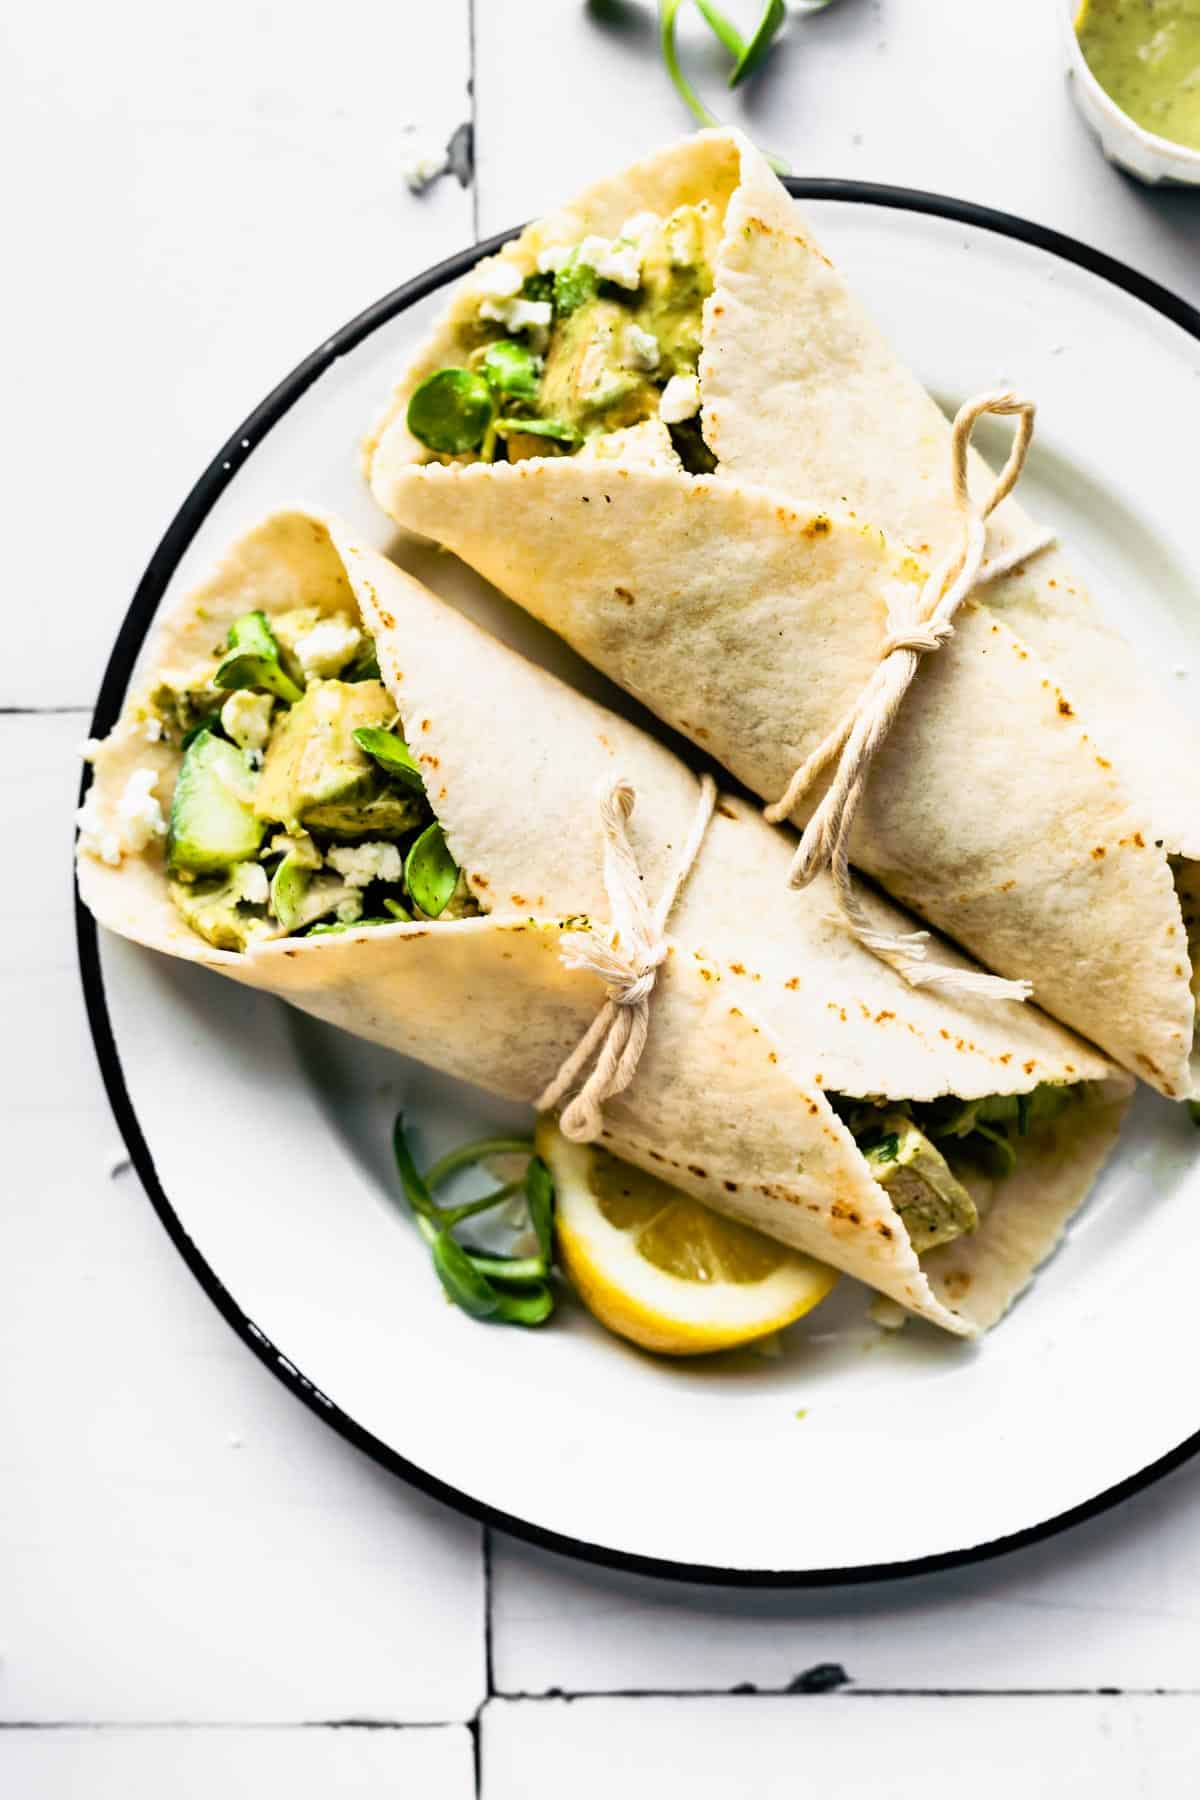 Two gluten-free green goddess chicken salad wraps on a plate.